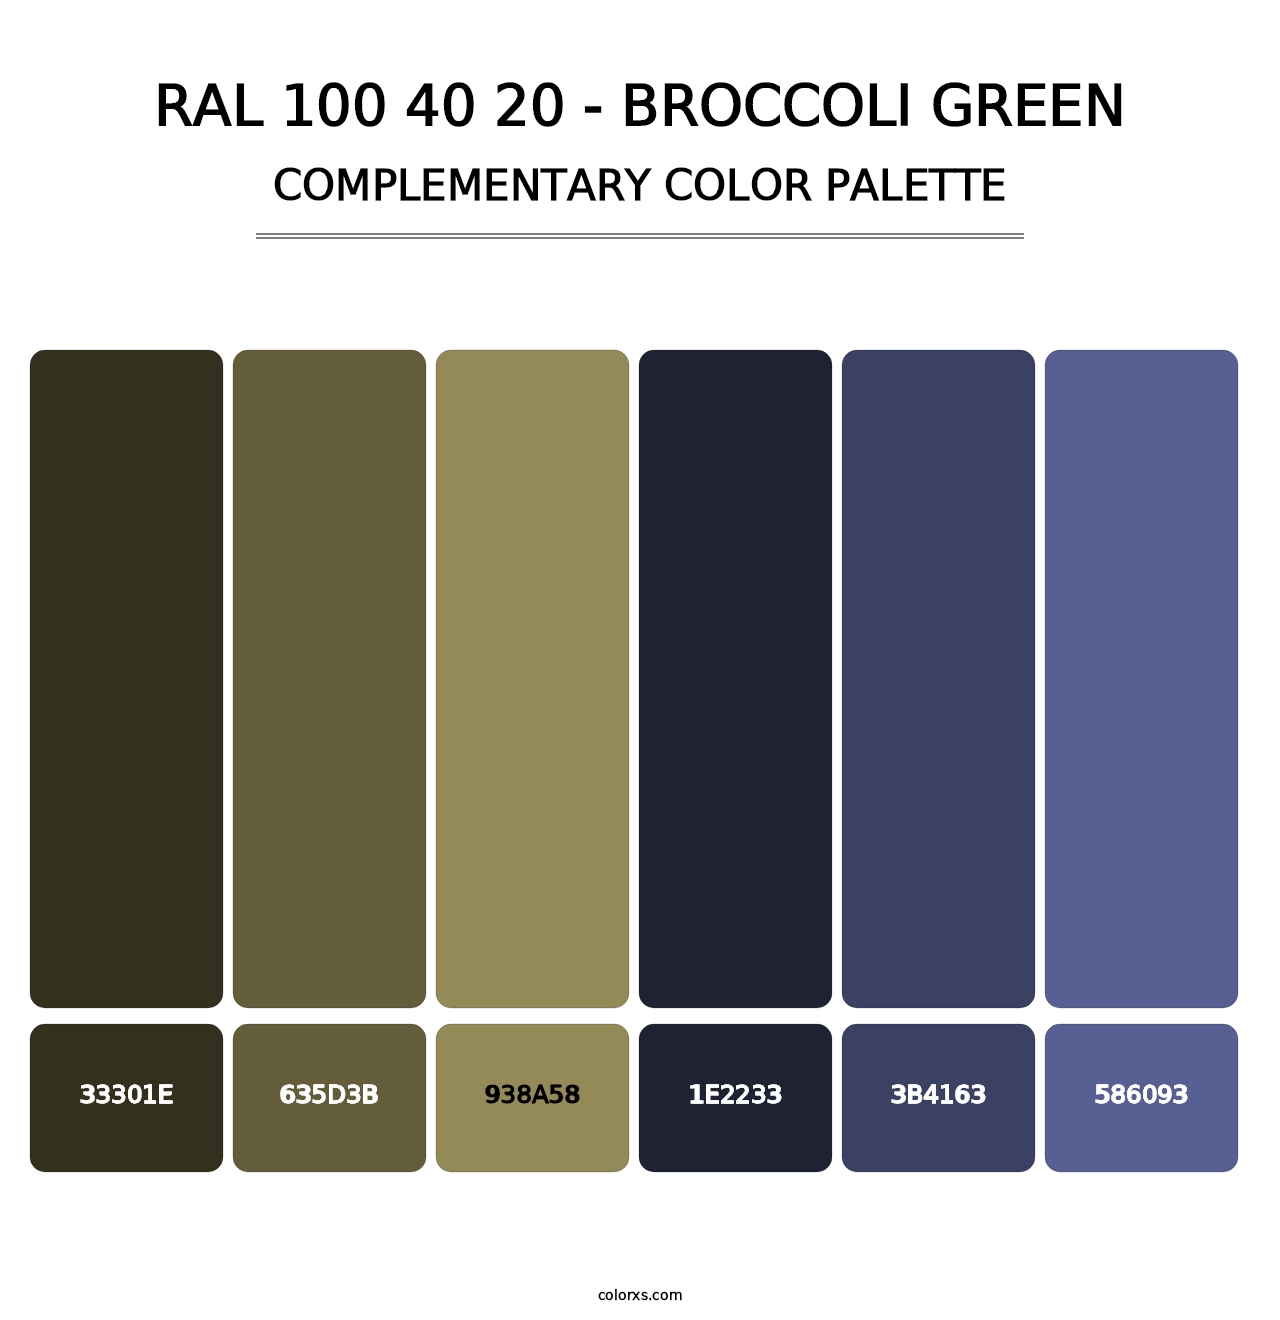 RAL 100 40 20 - Broccoli Green - Complementary Color Palette